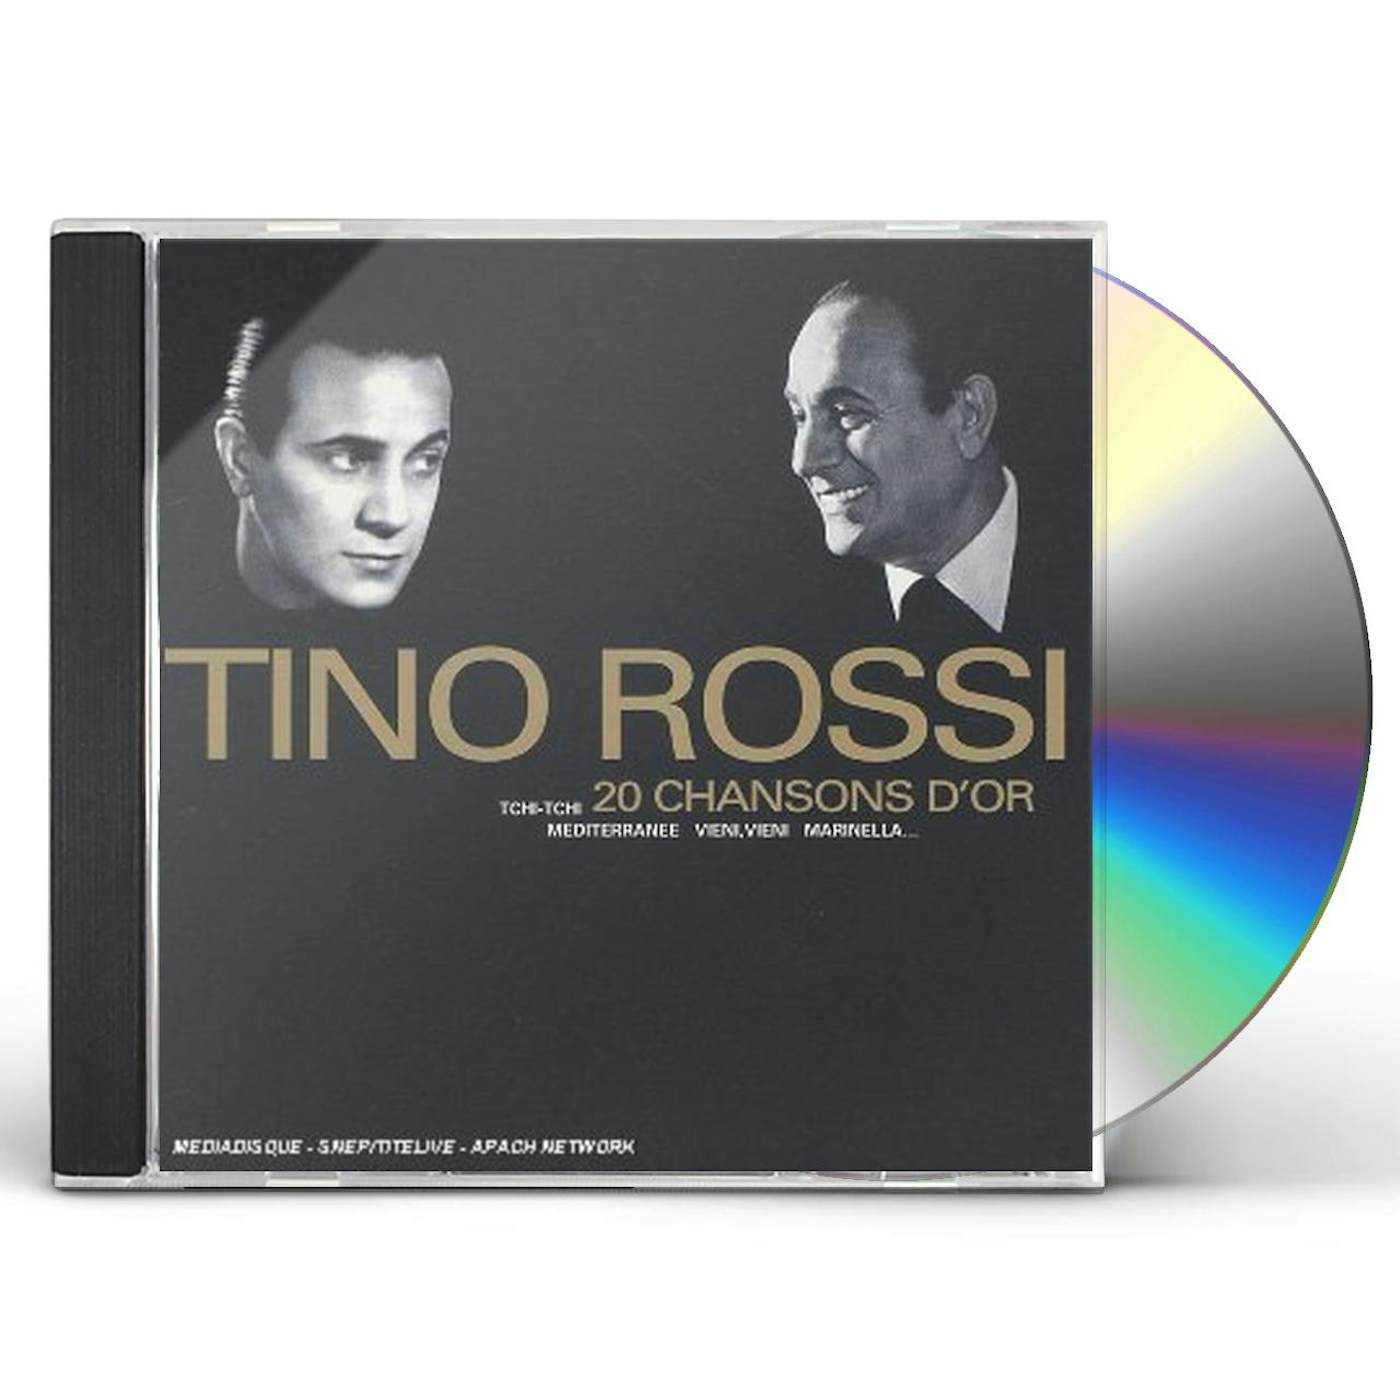 Tino Rossi 20 CHANSONS D'OR CD